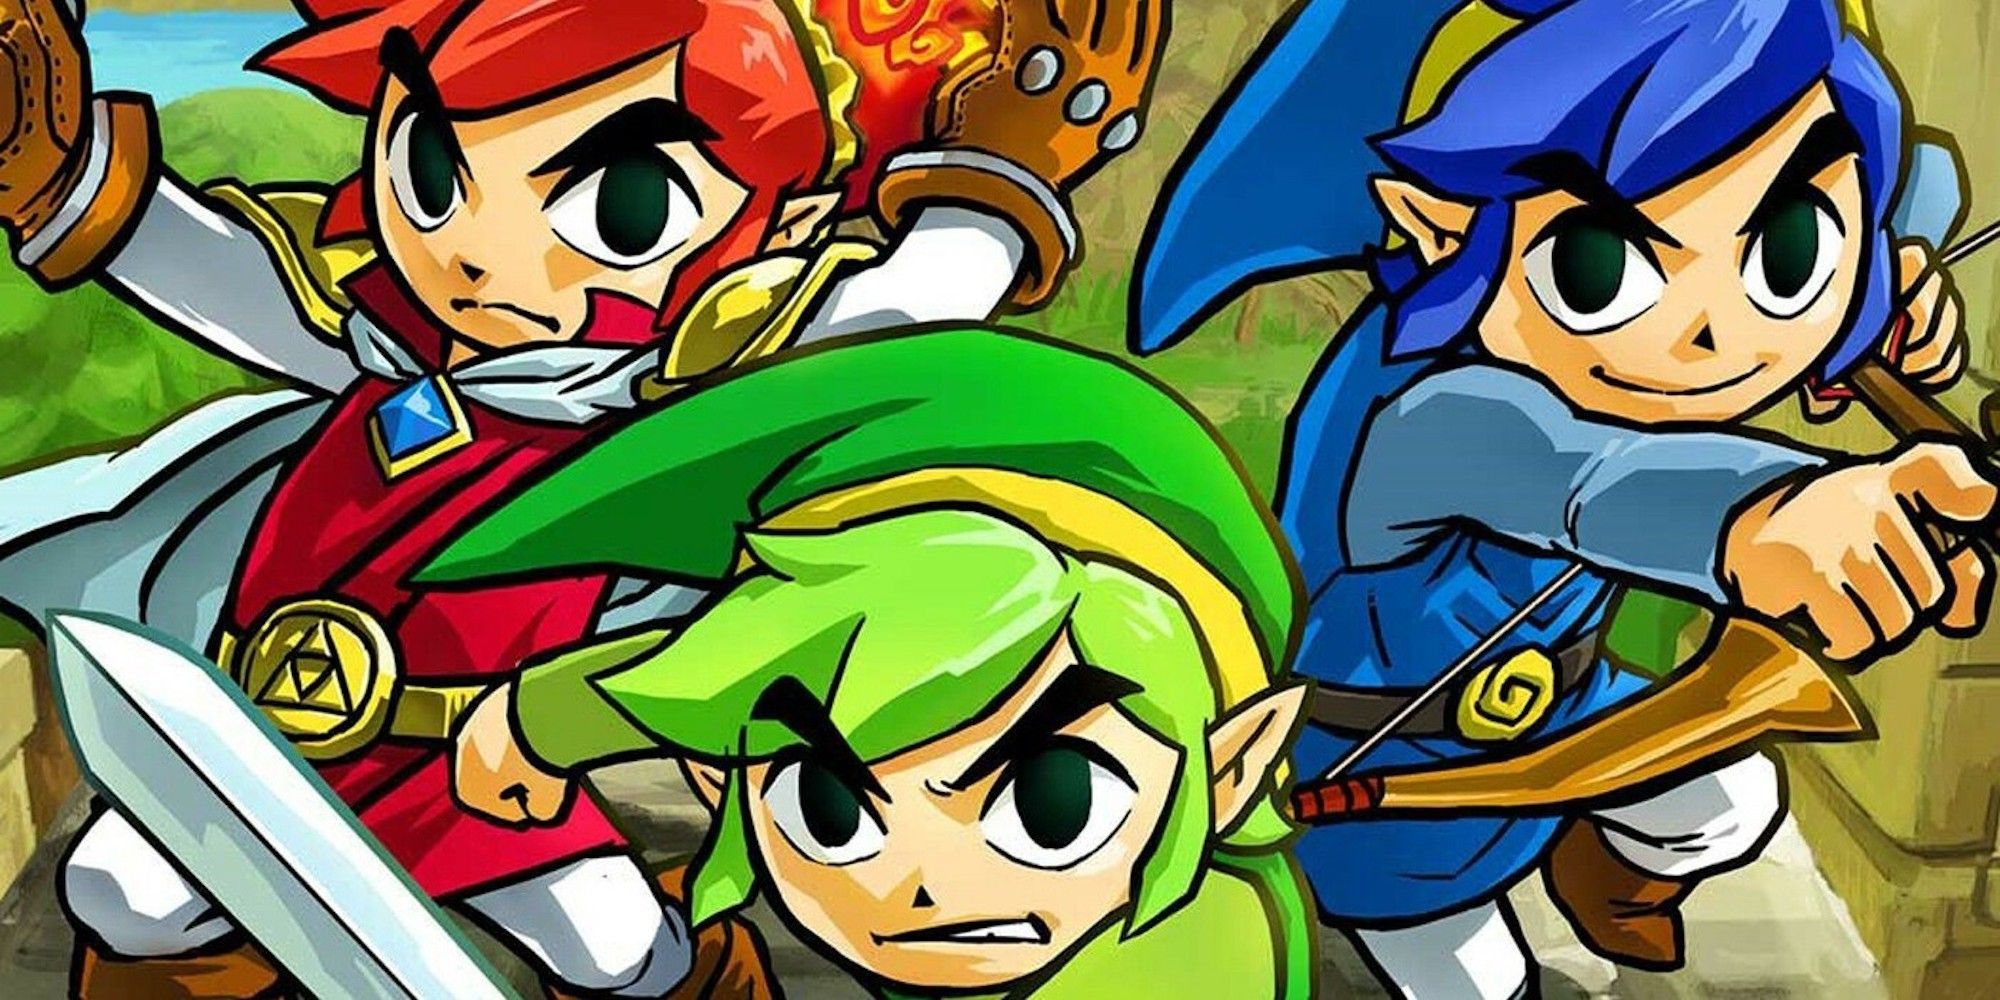 Promotional art featuring the three links in The Legend of Zelda Tri Force Heroes